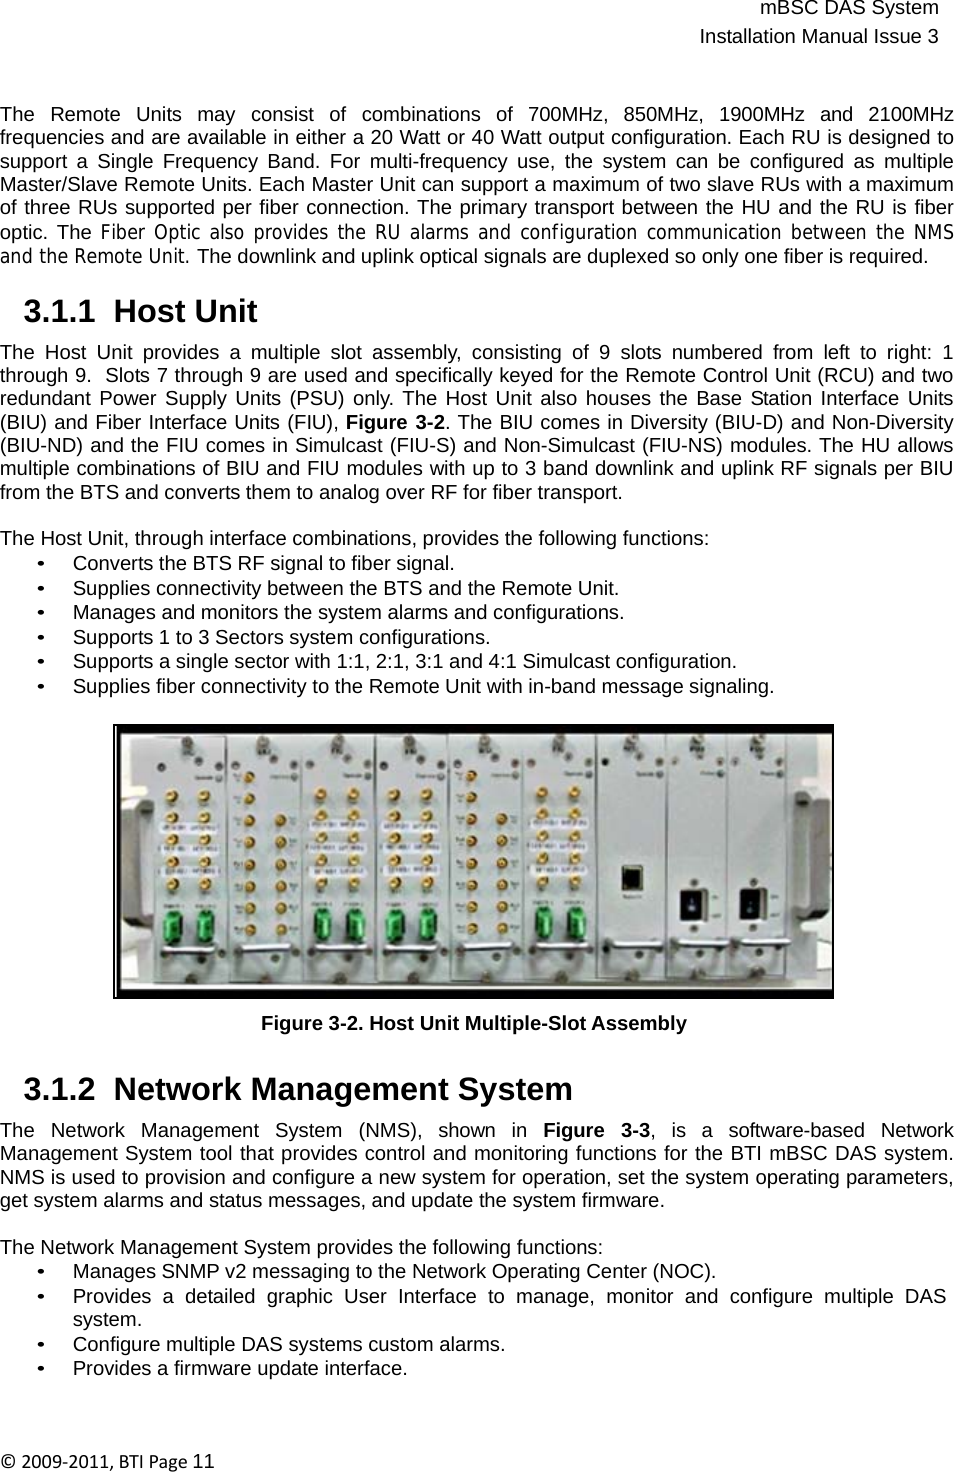 mBSC DAS SystemInstallation Manual Issue 3©2009‐2011,BTIPage11   The  Remote  Units  may  consist  of  combinations  of  700MHz,  850MHz,  1900MHz  and  2100MHz frequencies and are available in either a 20 Watt or 40 Watt output configuration. Each RU is designed to support a Single Frequency Band. For multi-frequency use, the system can be configured as multiple Master/Slave Remote Units. Each Master Unit can support a maximum of two slave RUs with a maximum of three RUs supported per fiber connection. The primary transport between the HU and the RU is fiber optic. The Fiber Optic also provides the RU alarms and configuration communication between the NMS and the Remote Unit. The downlink and uplink optical signals are duplexed so only one fiber is required.  3.1.1  Host Unit  The Host Unit provides a multiple slot assembly, consisting of 9 slots numbered from left to right: 1 through 9.  Slots 7 through 9 are used and specifically keyed for the Remote Control Unit (RCU) and two redundant Power Supply Units (PSU) only. The Host Unit also houses the Base Station Interface Units (BIU) and Fiber Interface Units (FIU), Figure 3-2. The BIU comes in Diversity (BIU-D) and Non-Diversity (BIU-ND) and the FIU comes in Simulcast (FIU-S) and Non-Simulcast (FIU-NS) modules. The HU allows multiple combinations of BIU and FIU modules with up to 3 band downlink and uplink RF signals per BIU from the BTS and converts them to analog over RF for fiber transport.  The Host Unit, through interface combinations, provides the following functions: • Converts the BTS RF signal to fiber signal. • Supplies connectivity between the BTS and the Remote Unit. • Manages and monitors the system alarms and configurations. • Supports 1 to 3 Sectors system configurations. • Supports a single sector with 1:1, 2:1, 3:1 and 4:1 Simulcast configuration. • Supplies fiber connectivity to the Remote Unit with in-band message signaling.                Figure 3-2. Host Unit Multiple-Slot Assembly   3.1.2  Network Management System  The  Network  Management  System  (NMS),  shown  in  Figure  3-3,  is  a  software-based  Network Management System tool that provides control and monitoring functions for the BTI mBSC DAS system. NMS is used to provision and configure a new system for operation, set the system operating parameters, get system alarms and status messages, and update the system firmware.  The Network Management System provides the following functions: • Manages SNMP v2 messaging to the Network Operating Center (NOC). • Provides  a  detailed  graphic  User  Interface  to  manage,  monitor  and  configure  multiple  DAS system. • Configure multiple DAS systems custom alarms. • Provides a firmware update interface. 